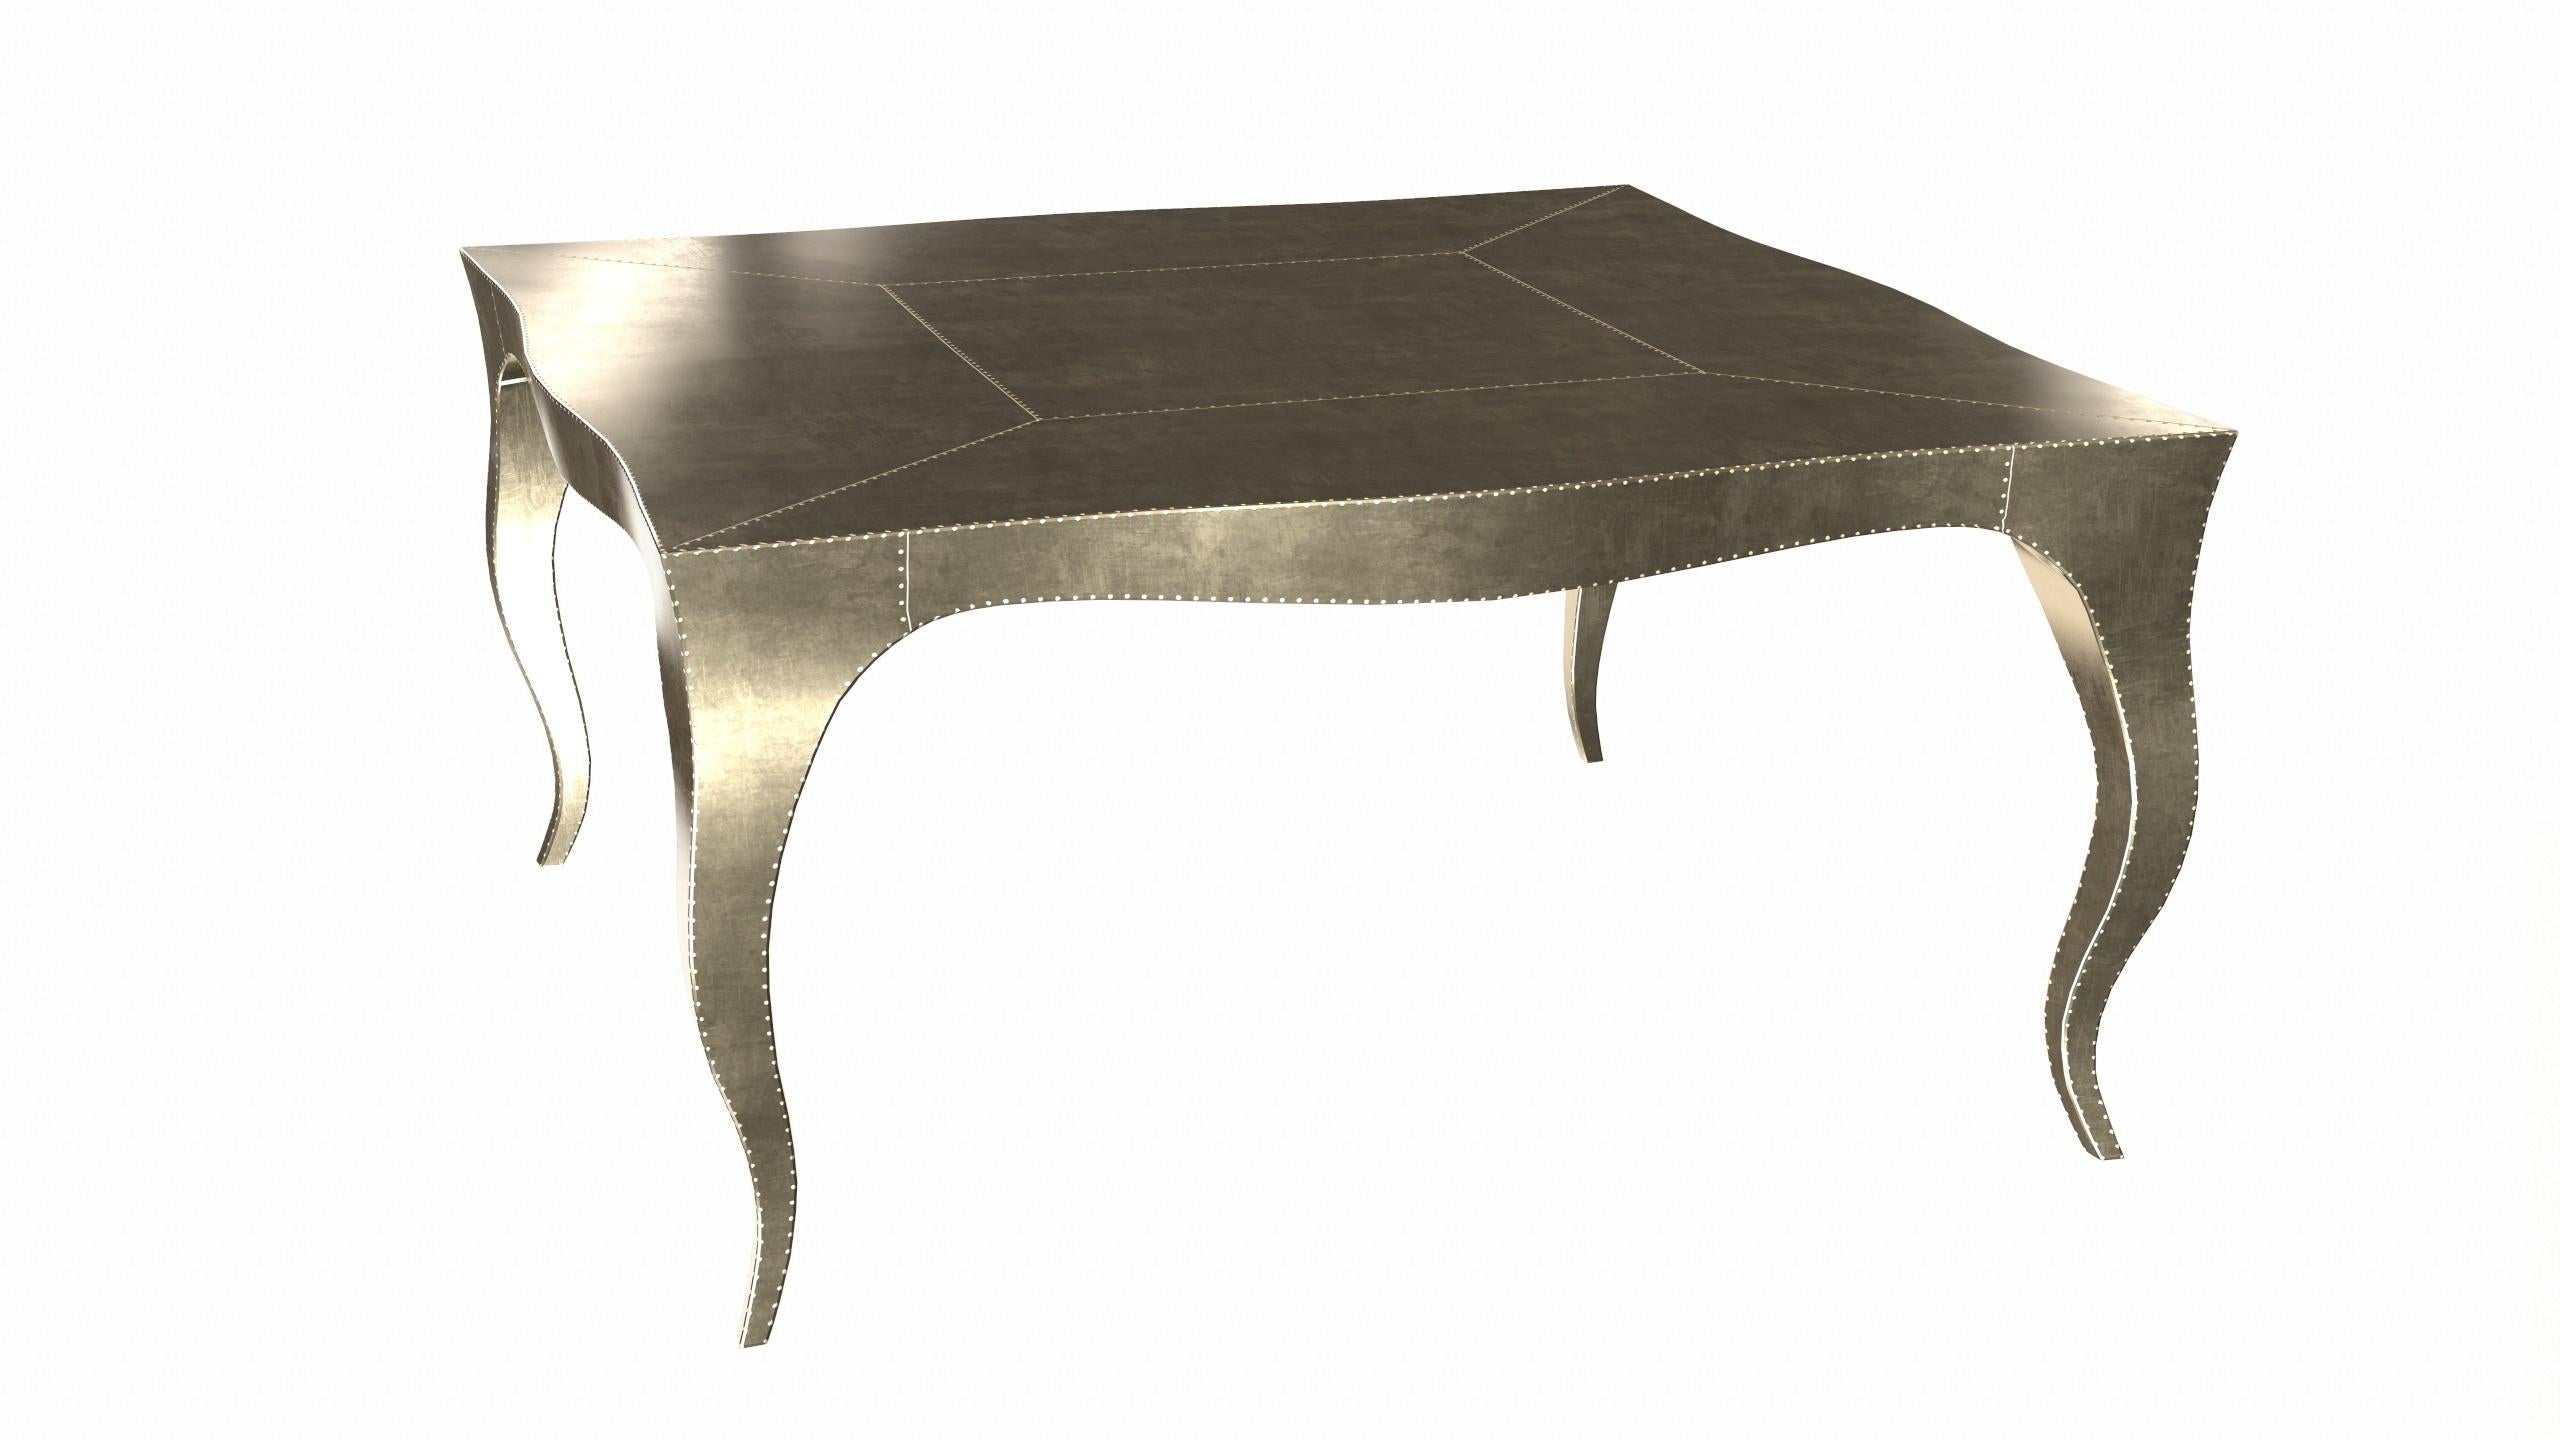 Louise Art Deco Center Tables Smooth Brass 18.5x18.5x10 inch by Paul Mathieu For Sale 3